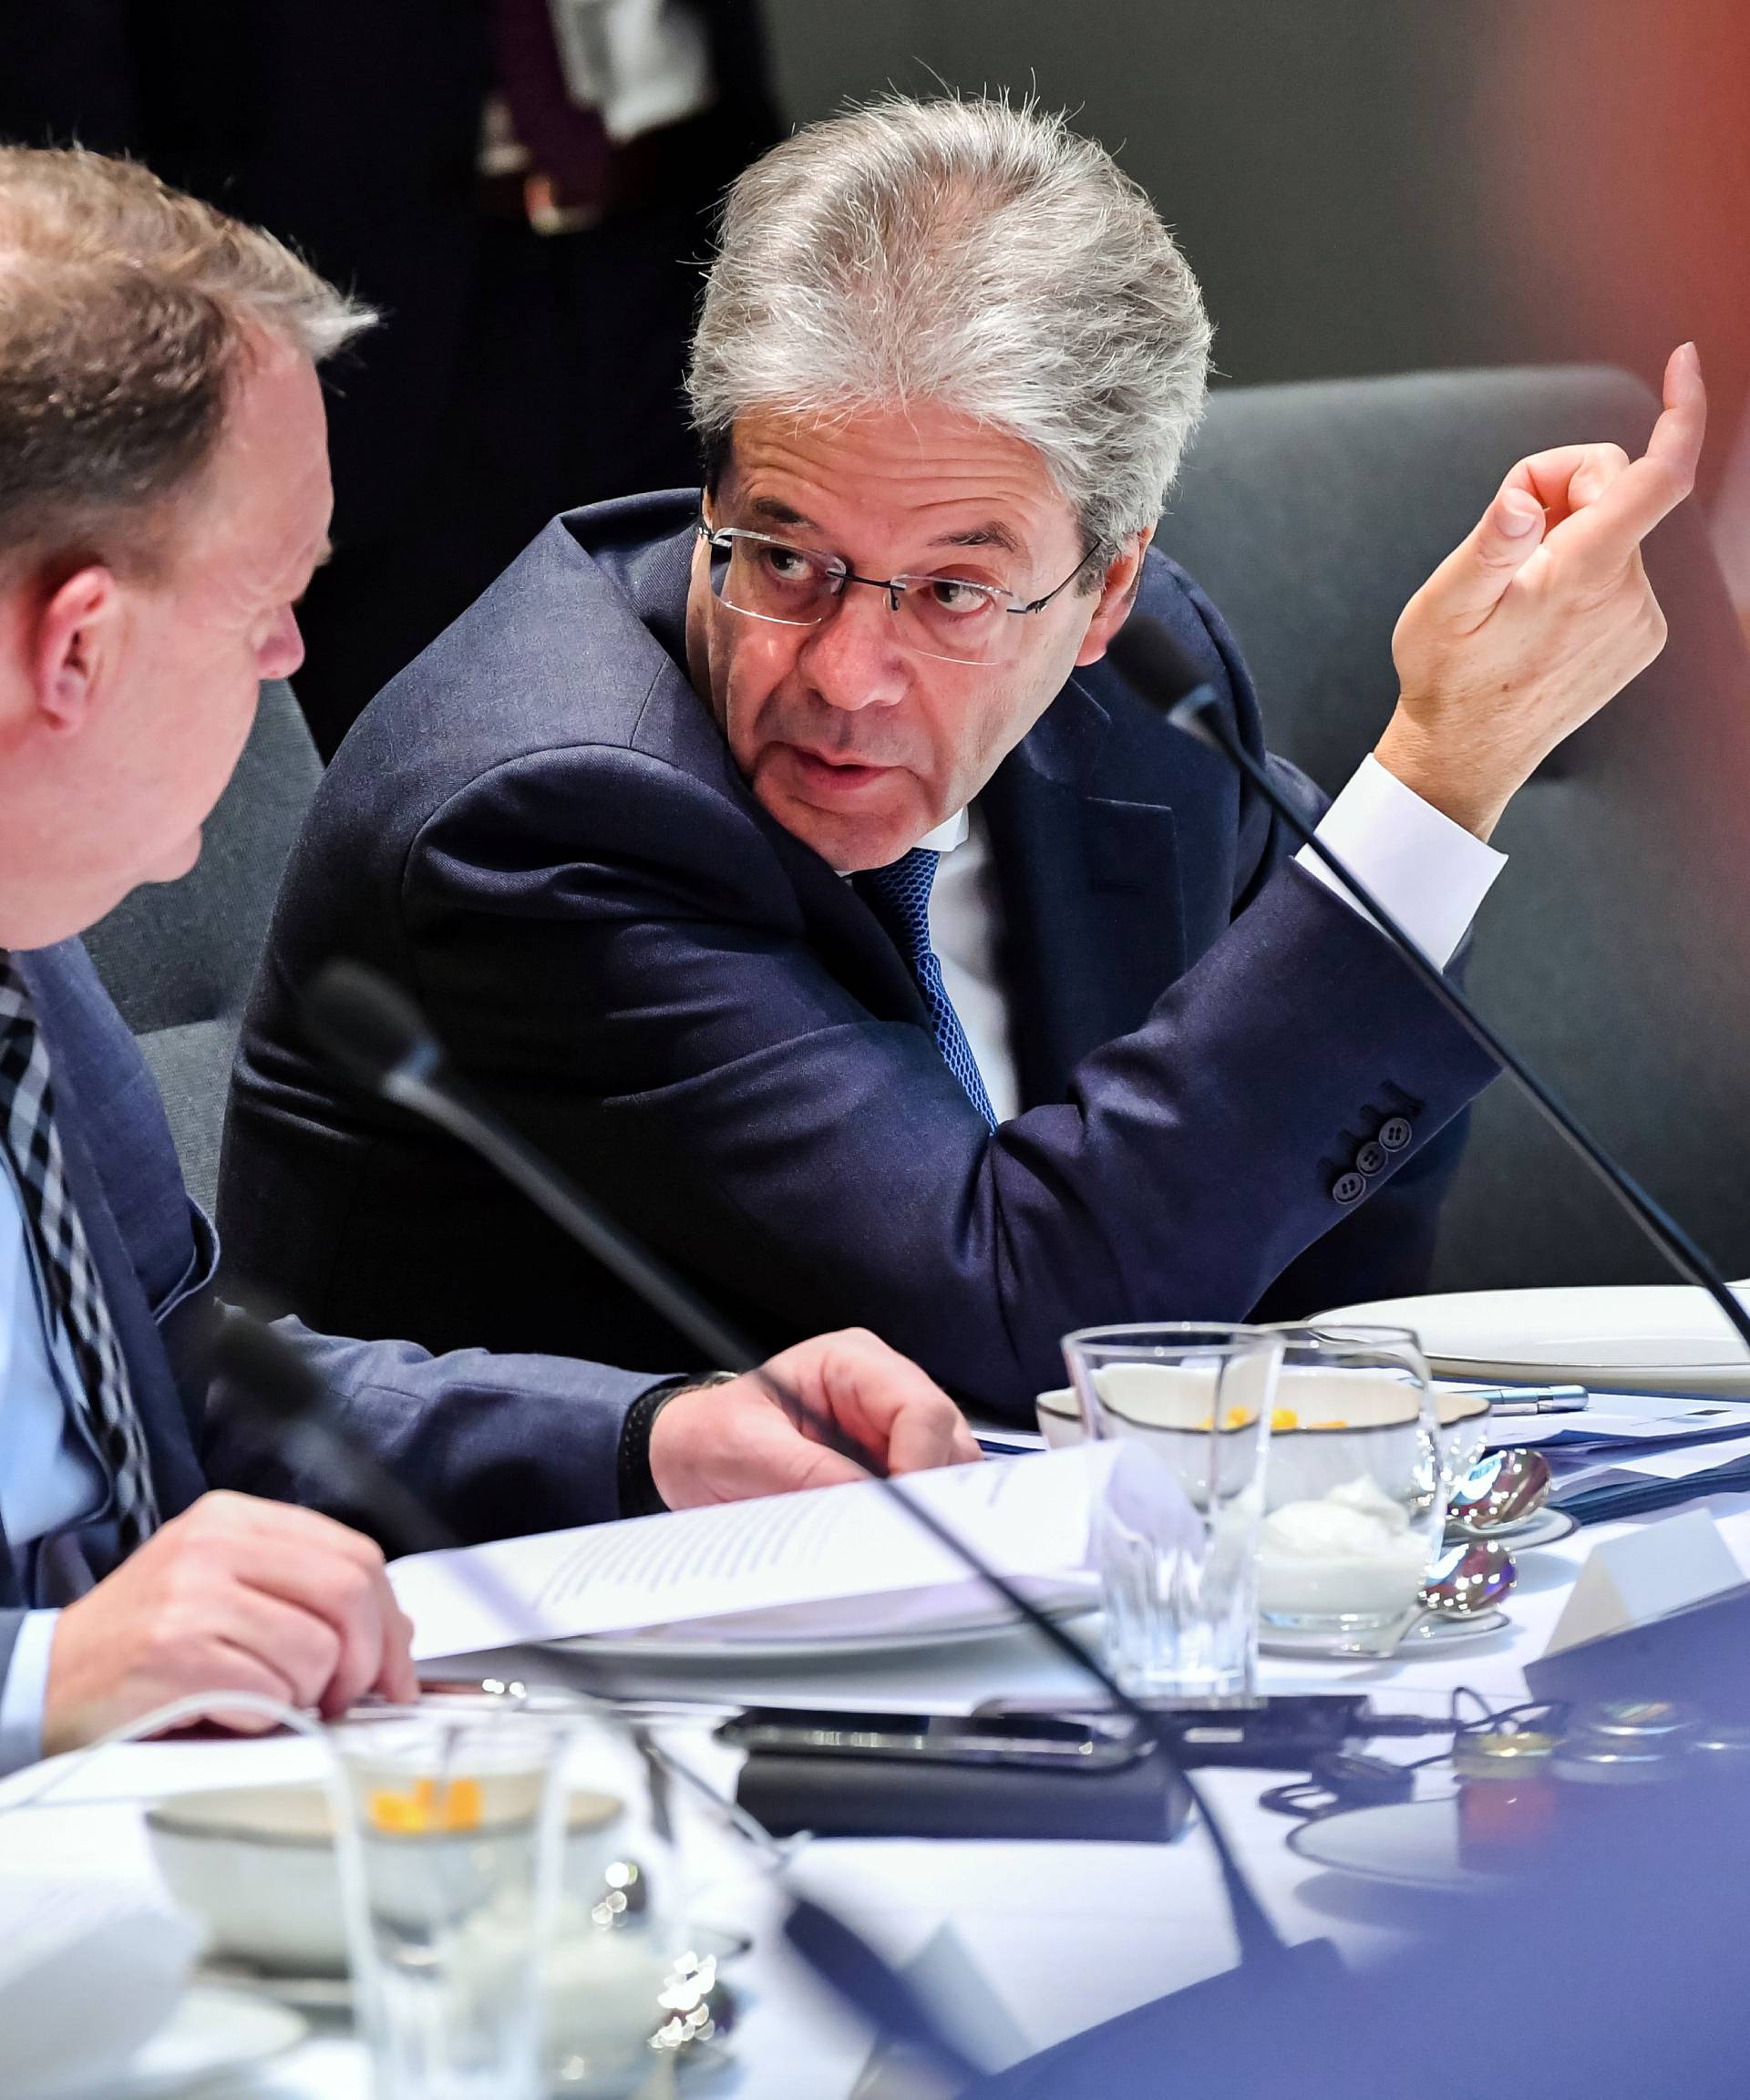 Denmark's PM Rasmussen and Italy's PM Gentiloni attend a EU leaders summit in Brussels